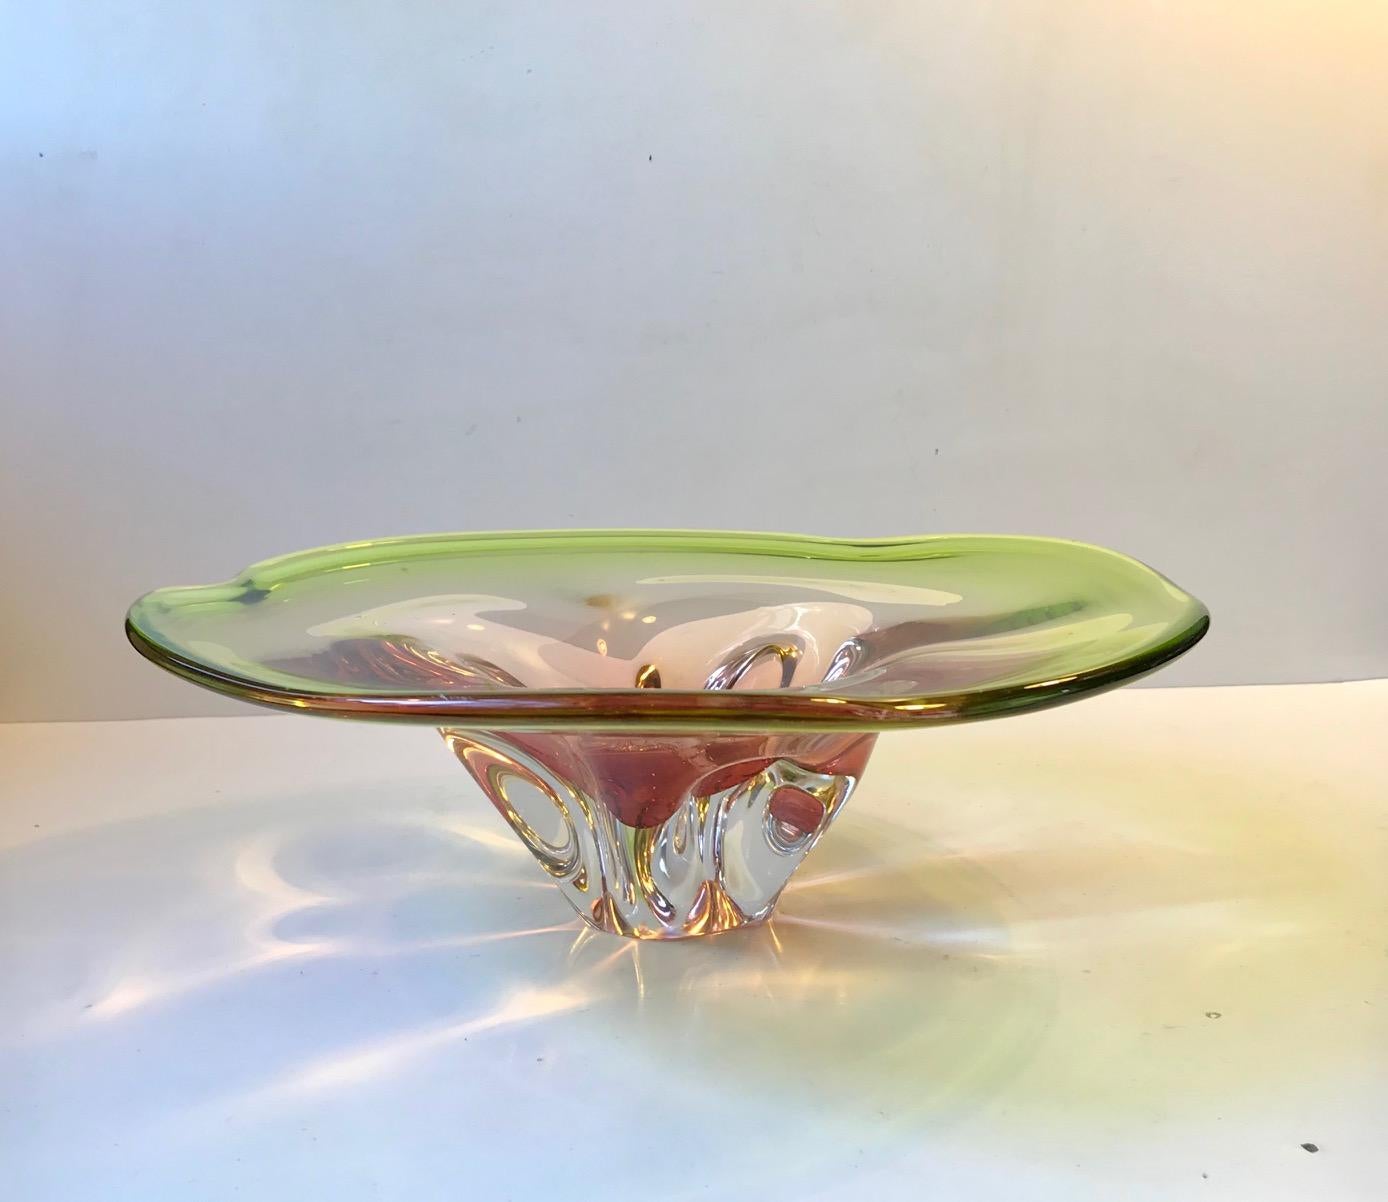 Large, monumental and heavy art glass bowl. Made from cased green main glass with a center in sculpted pink and clear glass. It shape, colors and delicacy mimics an exotic water lily. It was designed by Archimedes Seguso during the late 1950s and